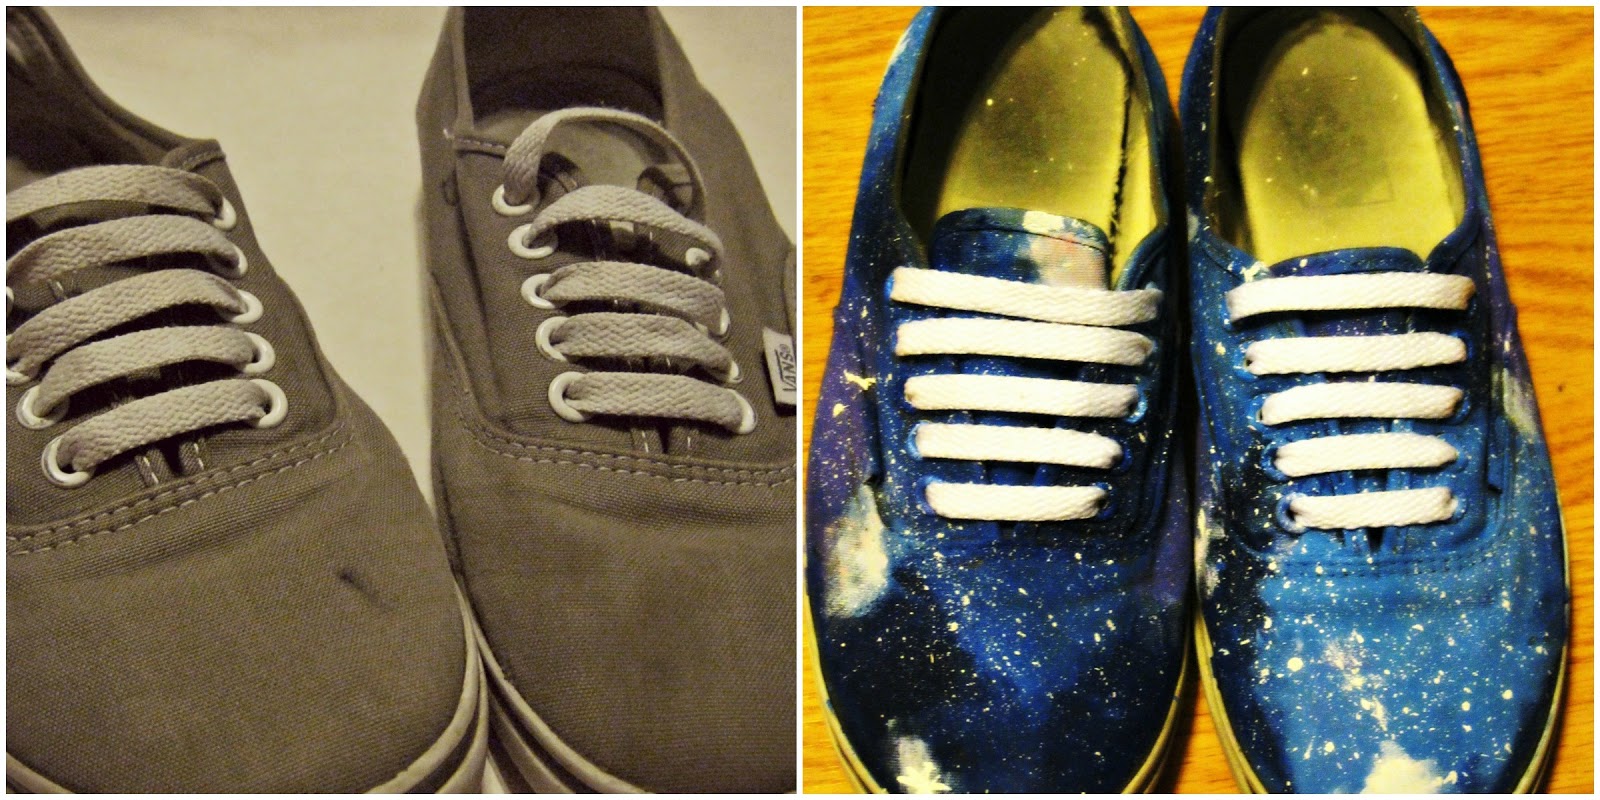 & Well, This Is Katie. : DIY - Galaxy Shoes!